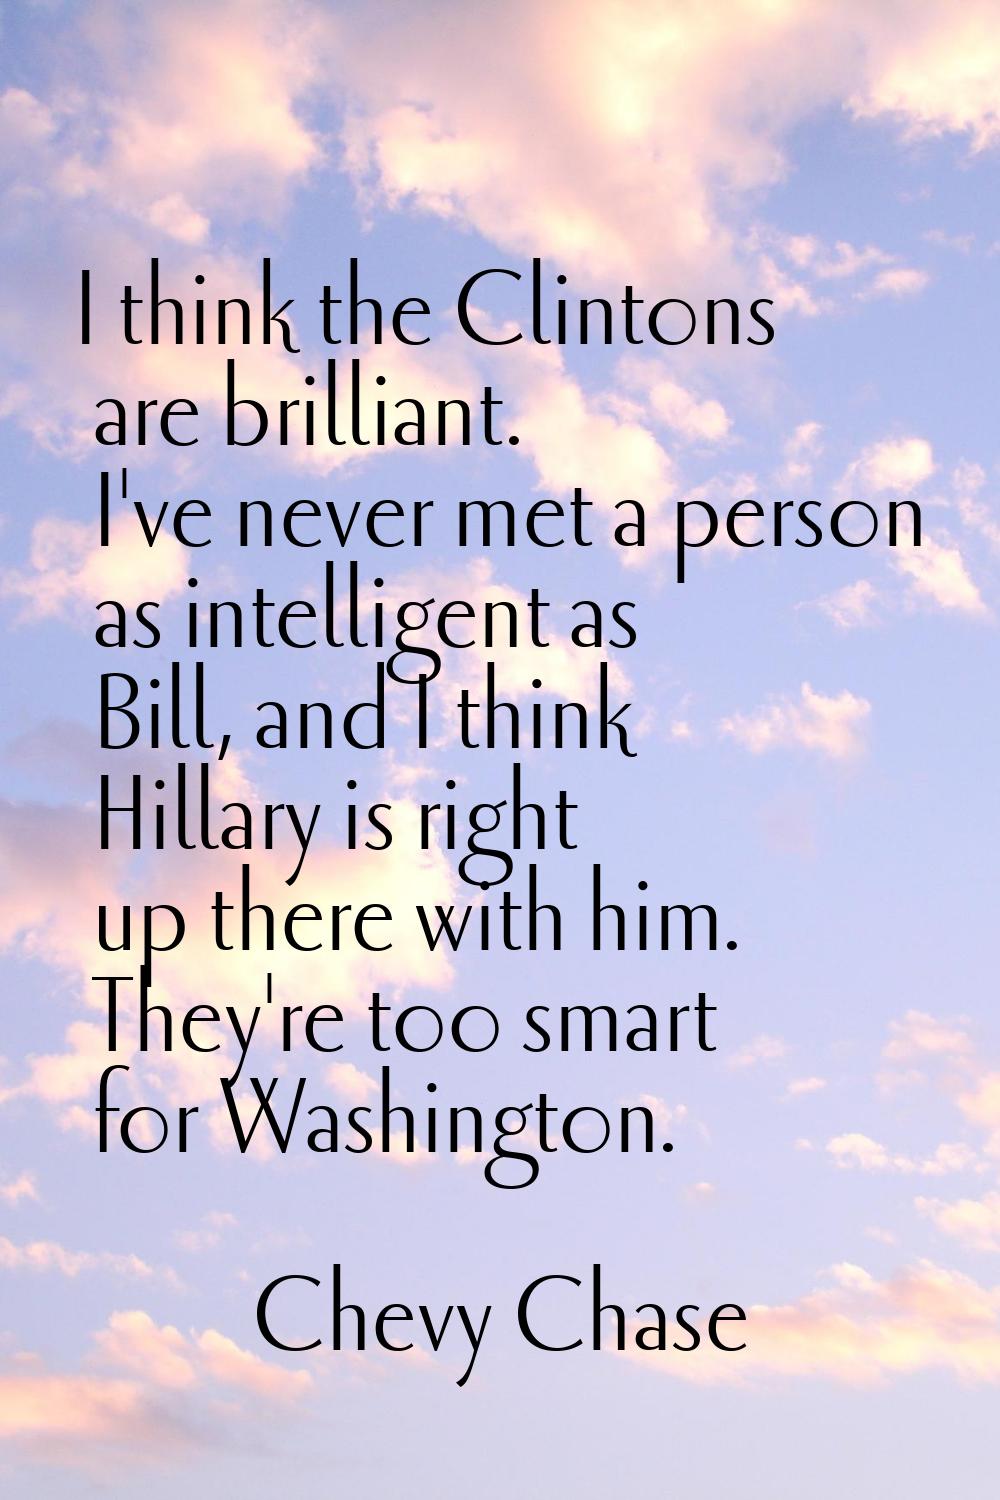 I think the Clintons are brilliant. I've never met a person as intelligent as Bill, and I think Hil